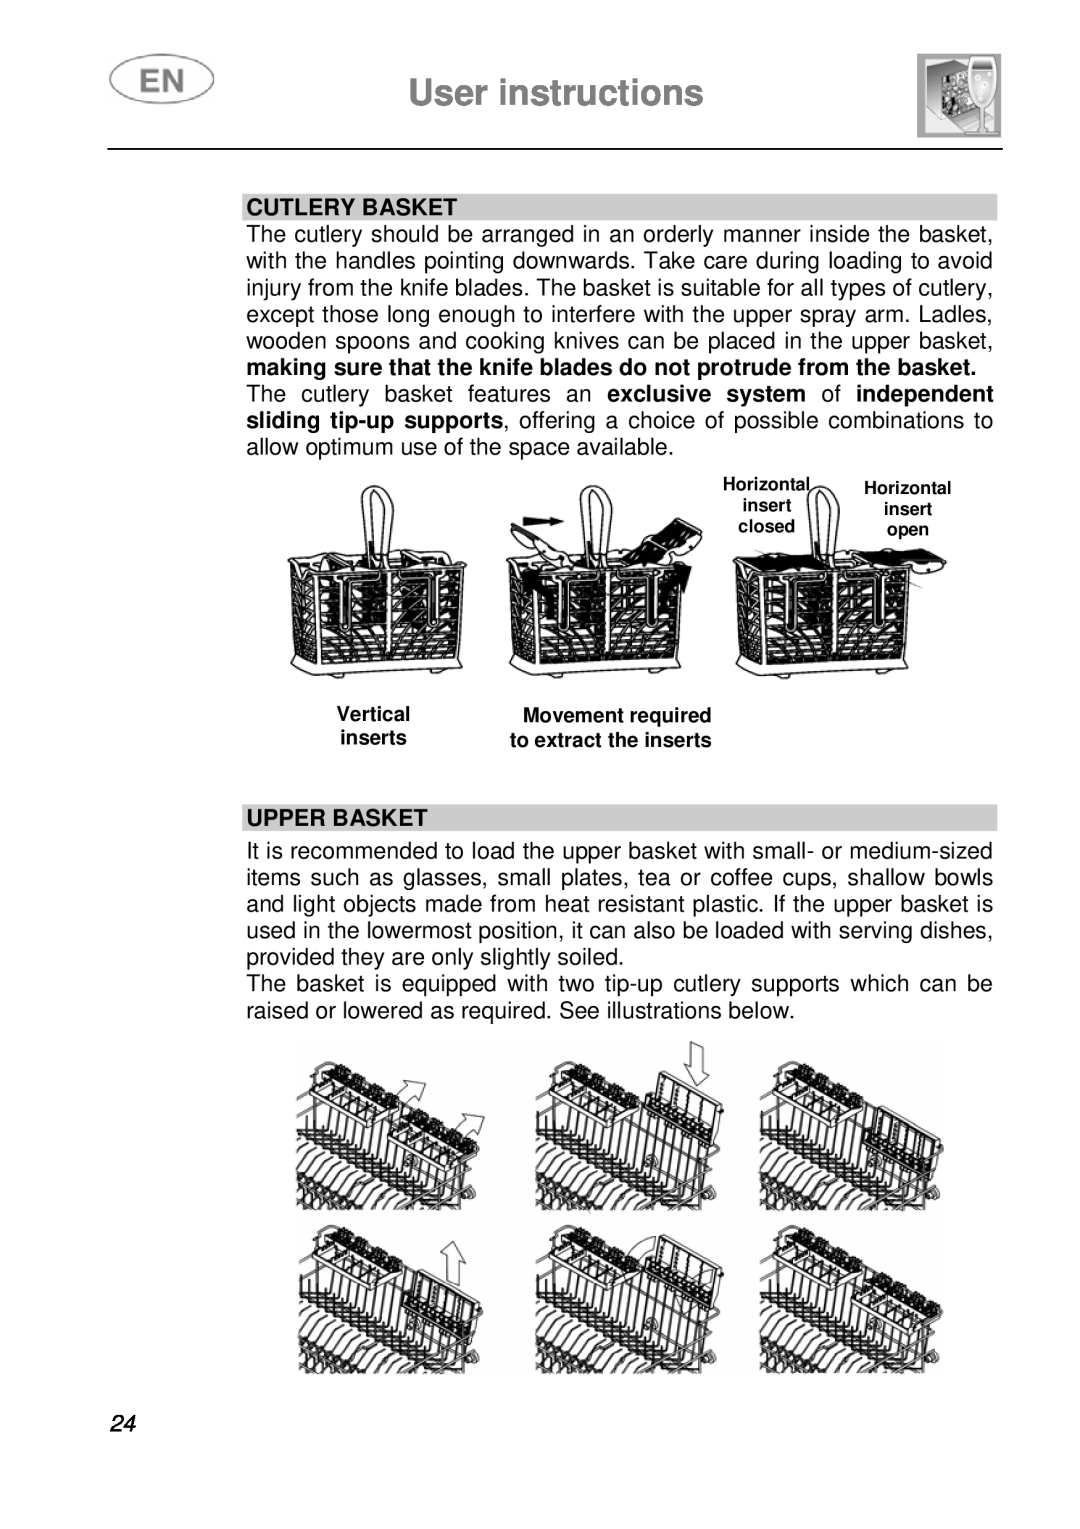 Smeg DF410BL1 instruction manual Cutlery Basket, Upper Basket, User instructions, Vertical, Movement required, inserts 